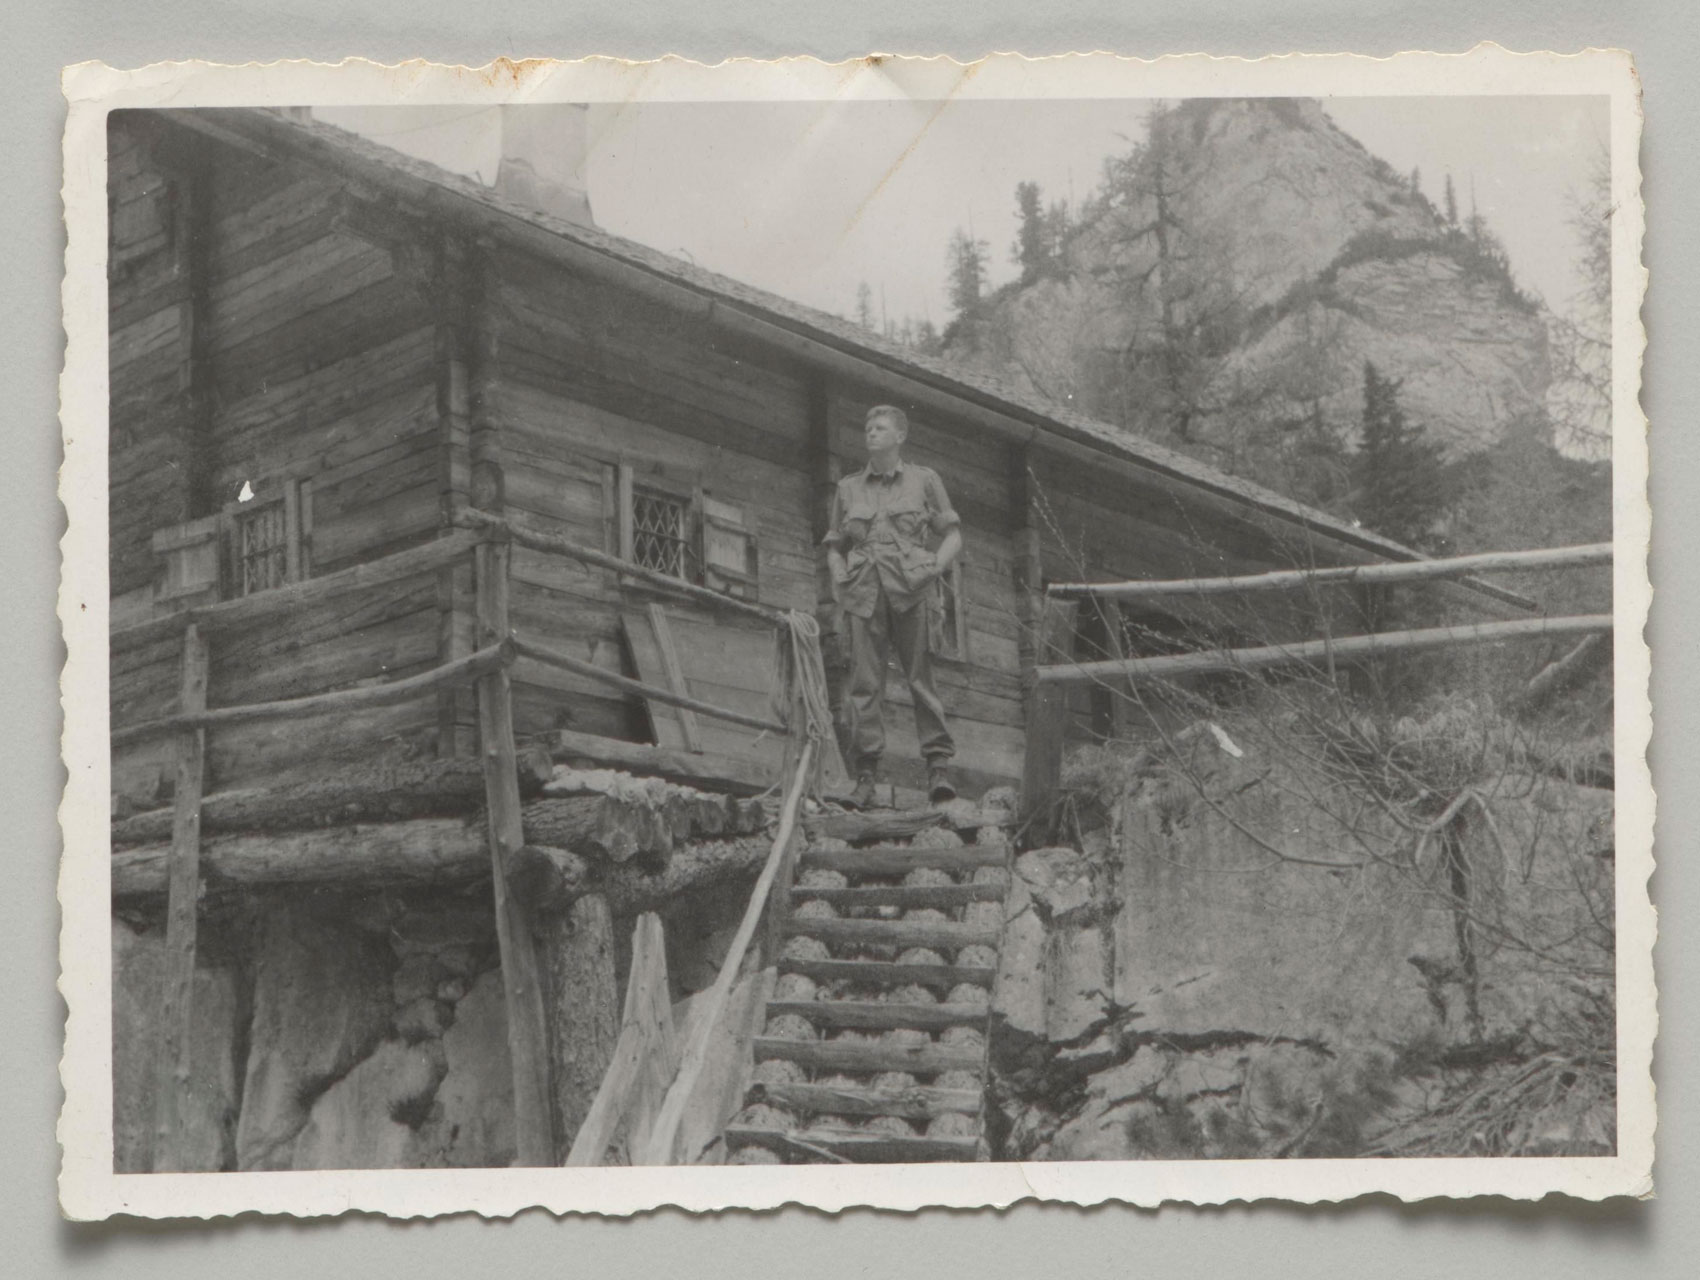 US soldier Donald Wayne Richardson standing in front of a log cabin.